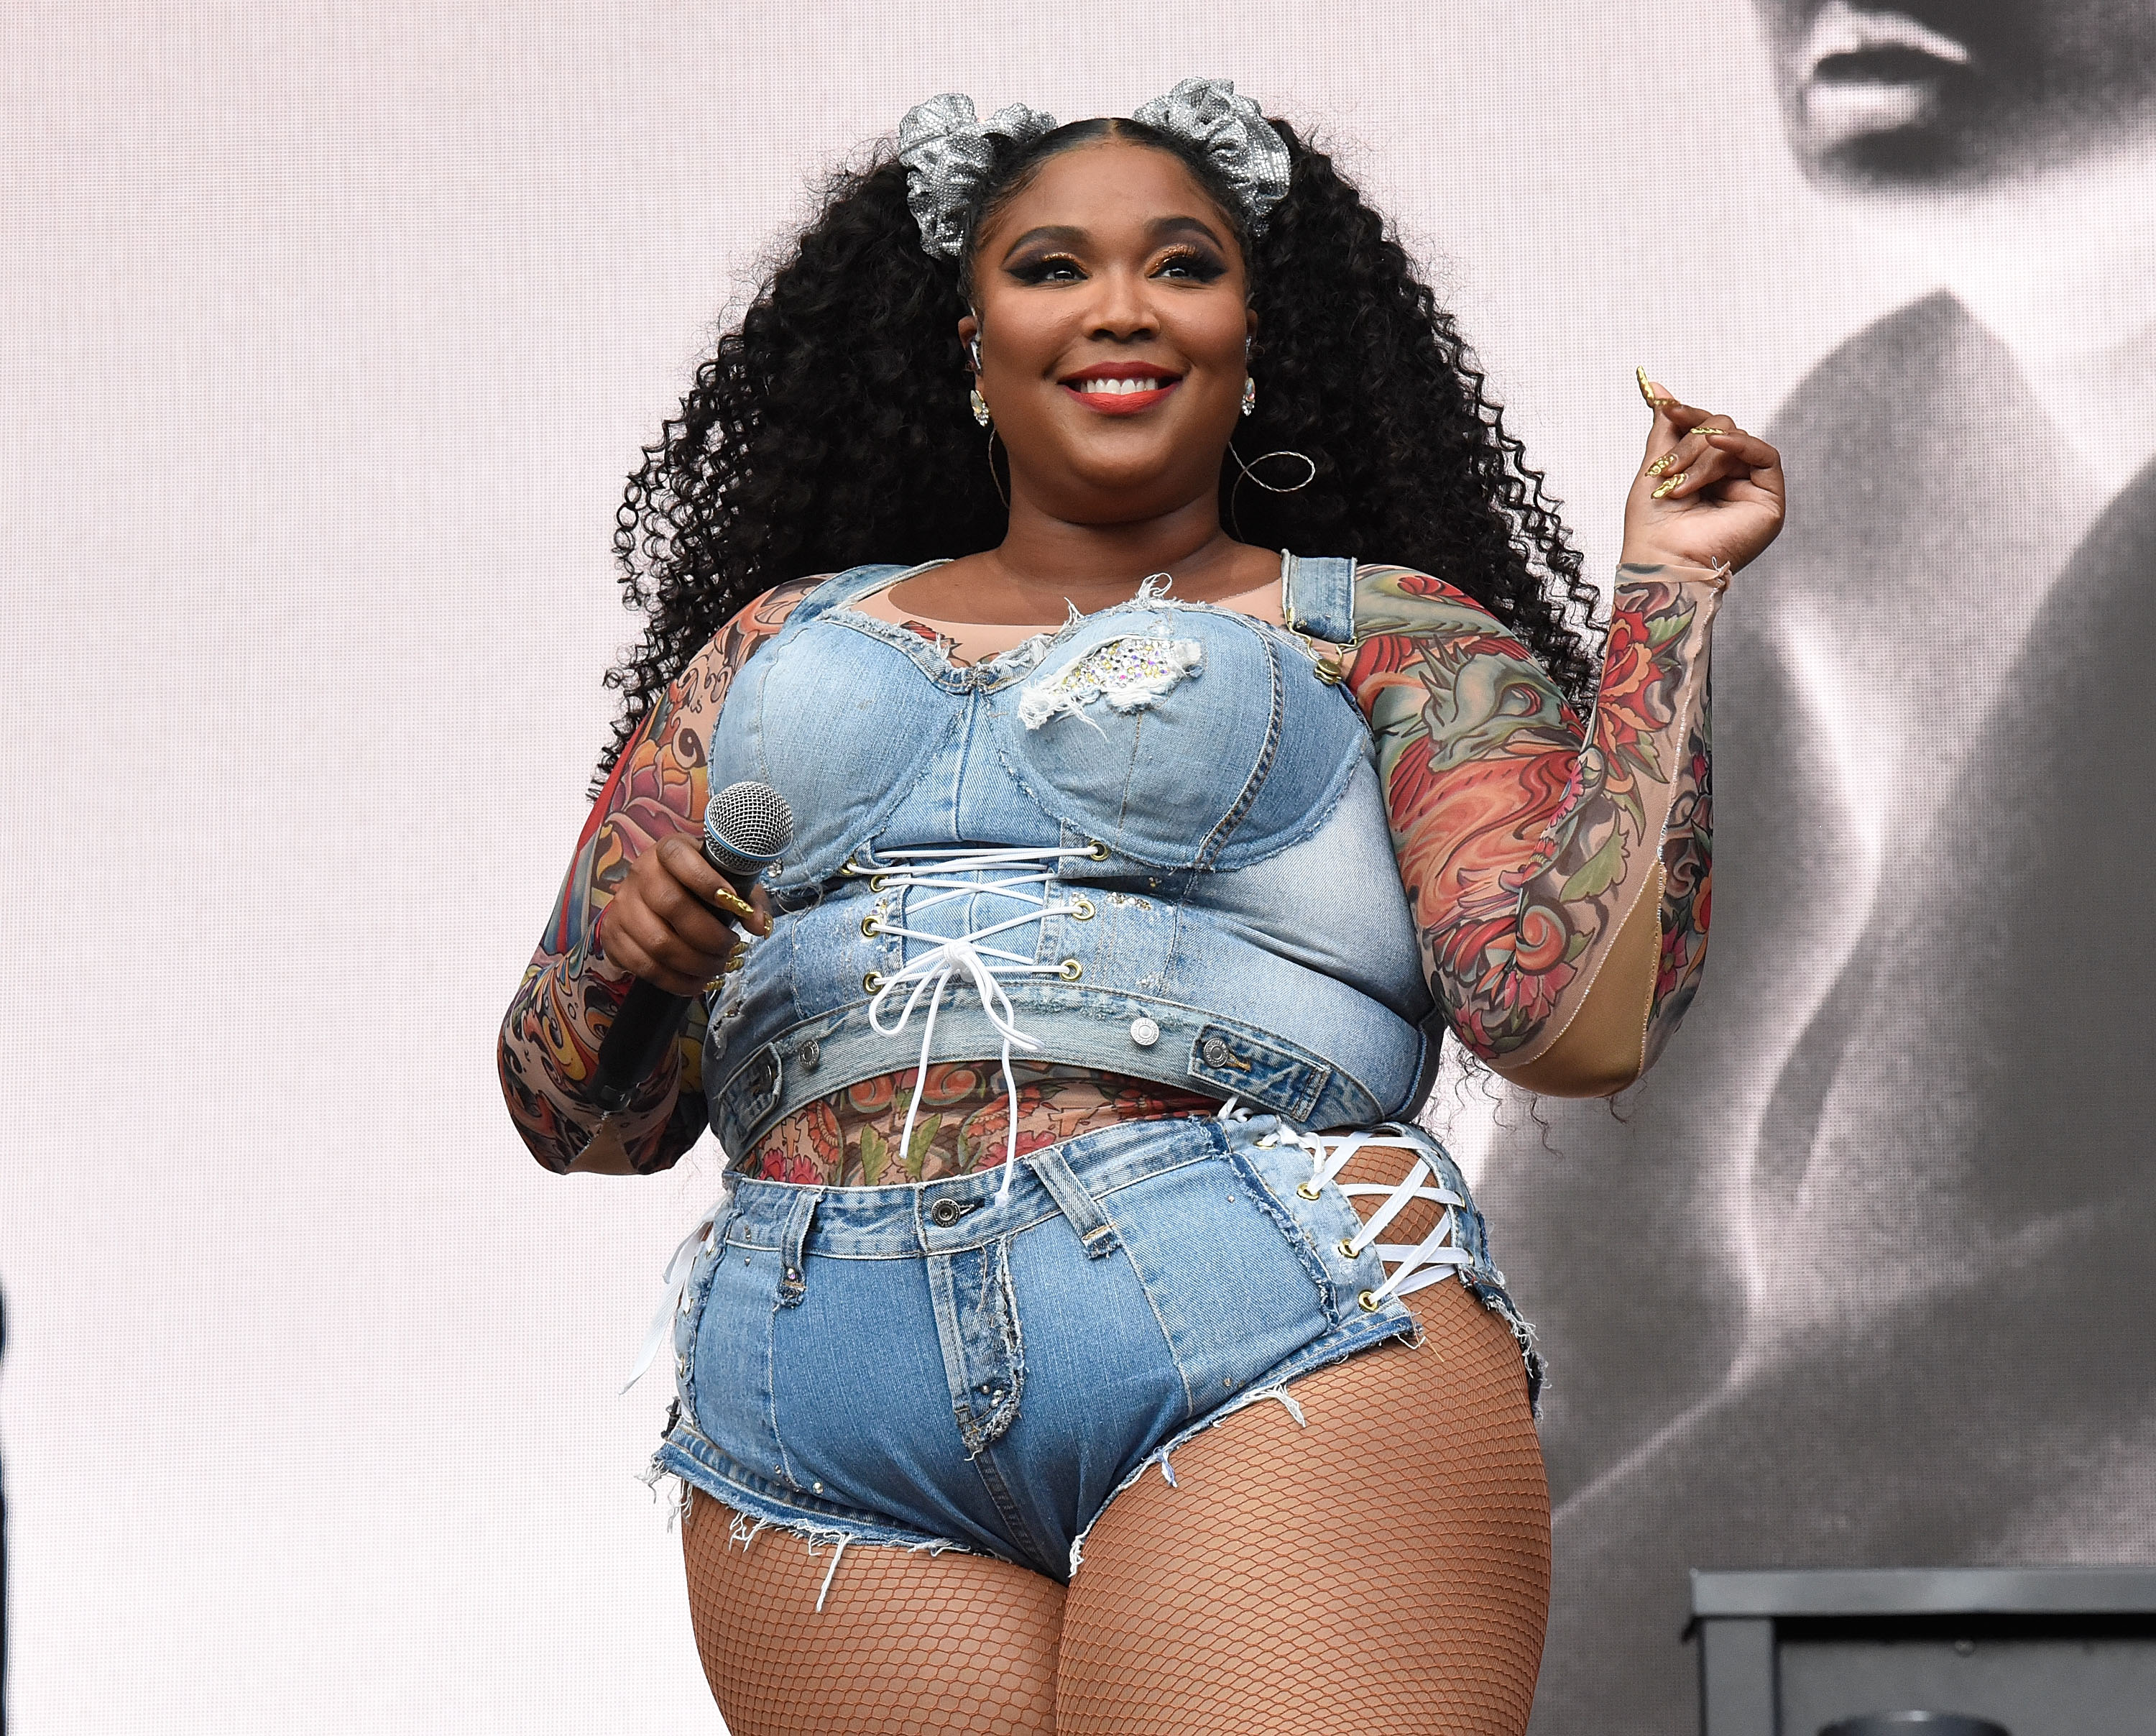  Lizzo performs at Made in America - Day 2 at Benjamin Franklin Parkway on August 31, 2019| Photo: Getty Images